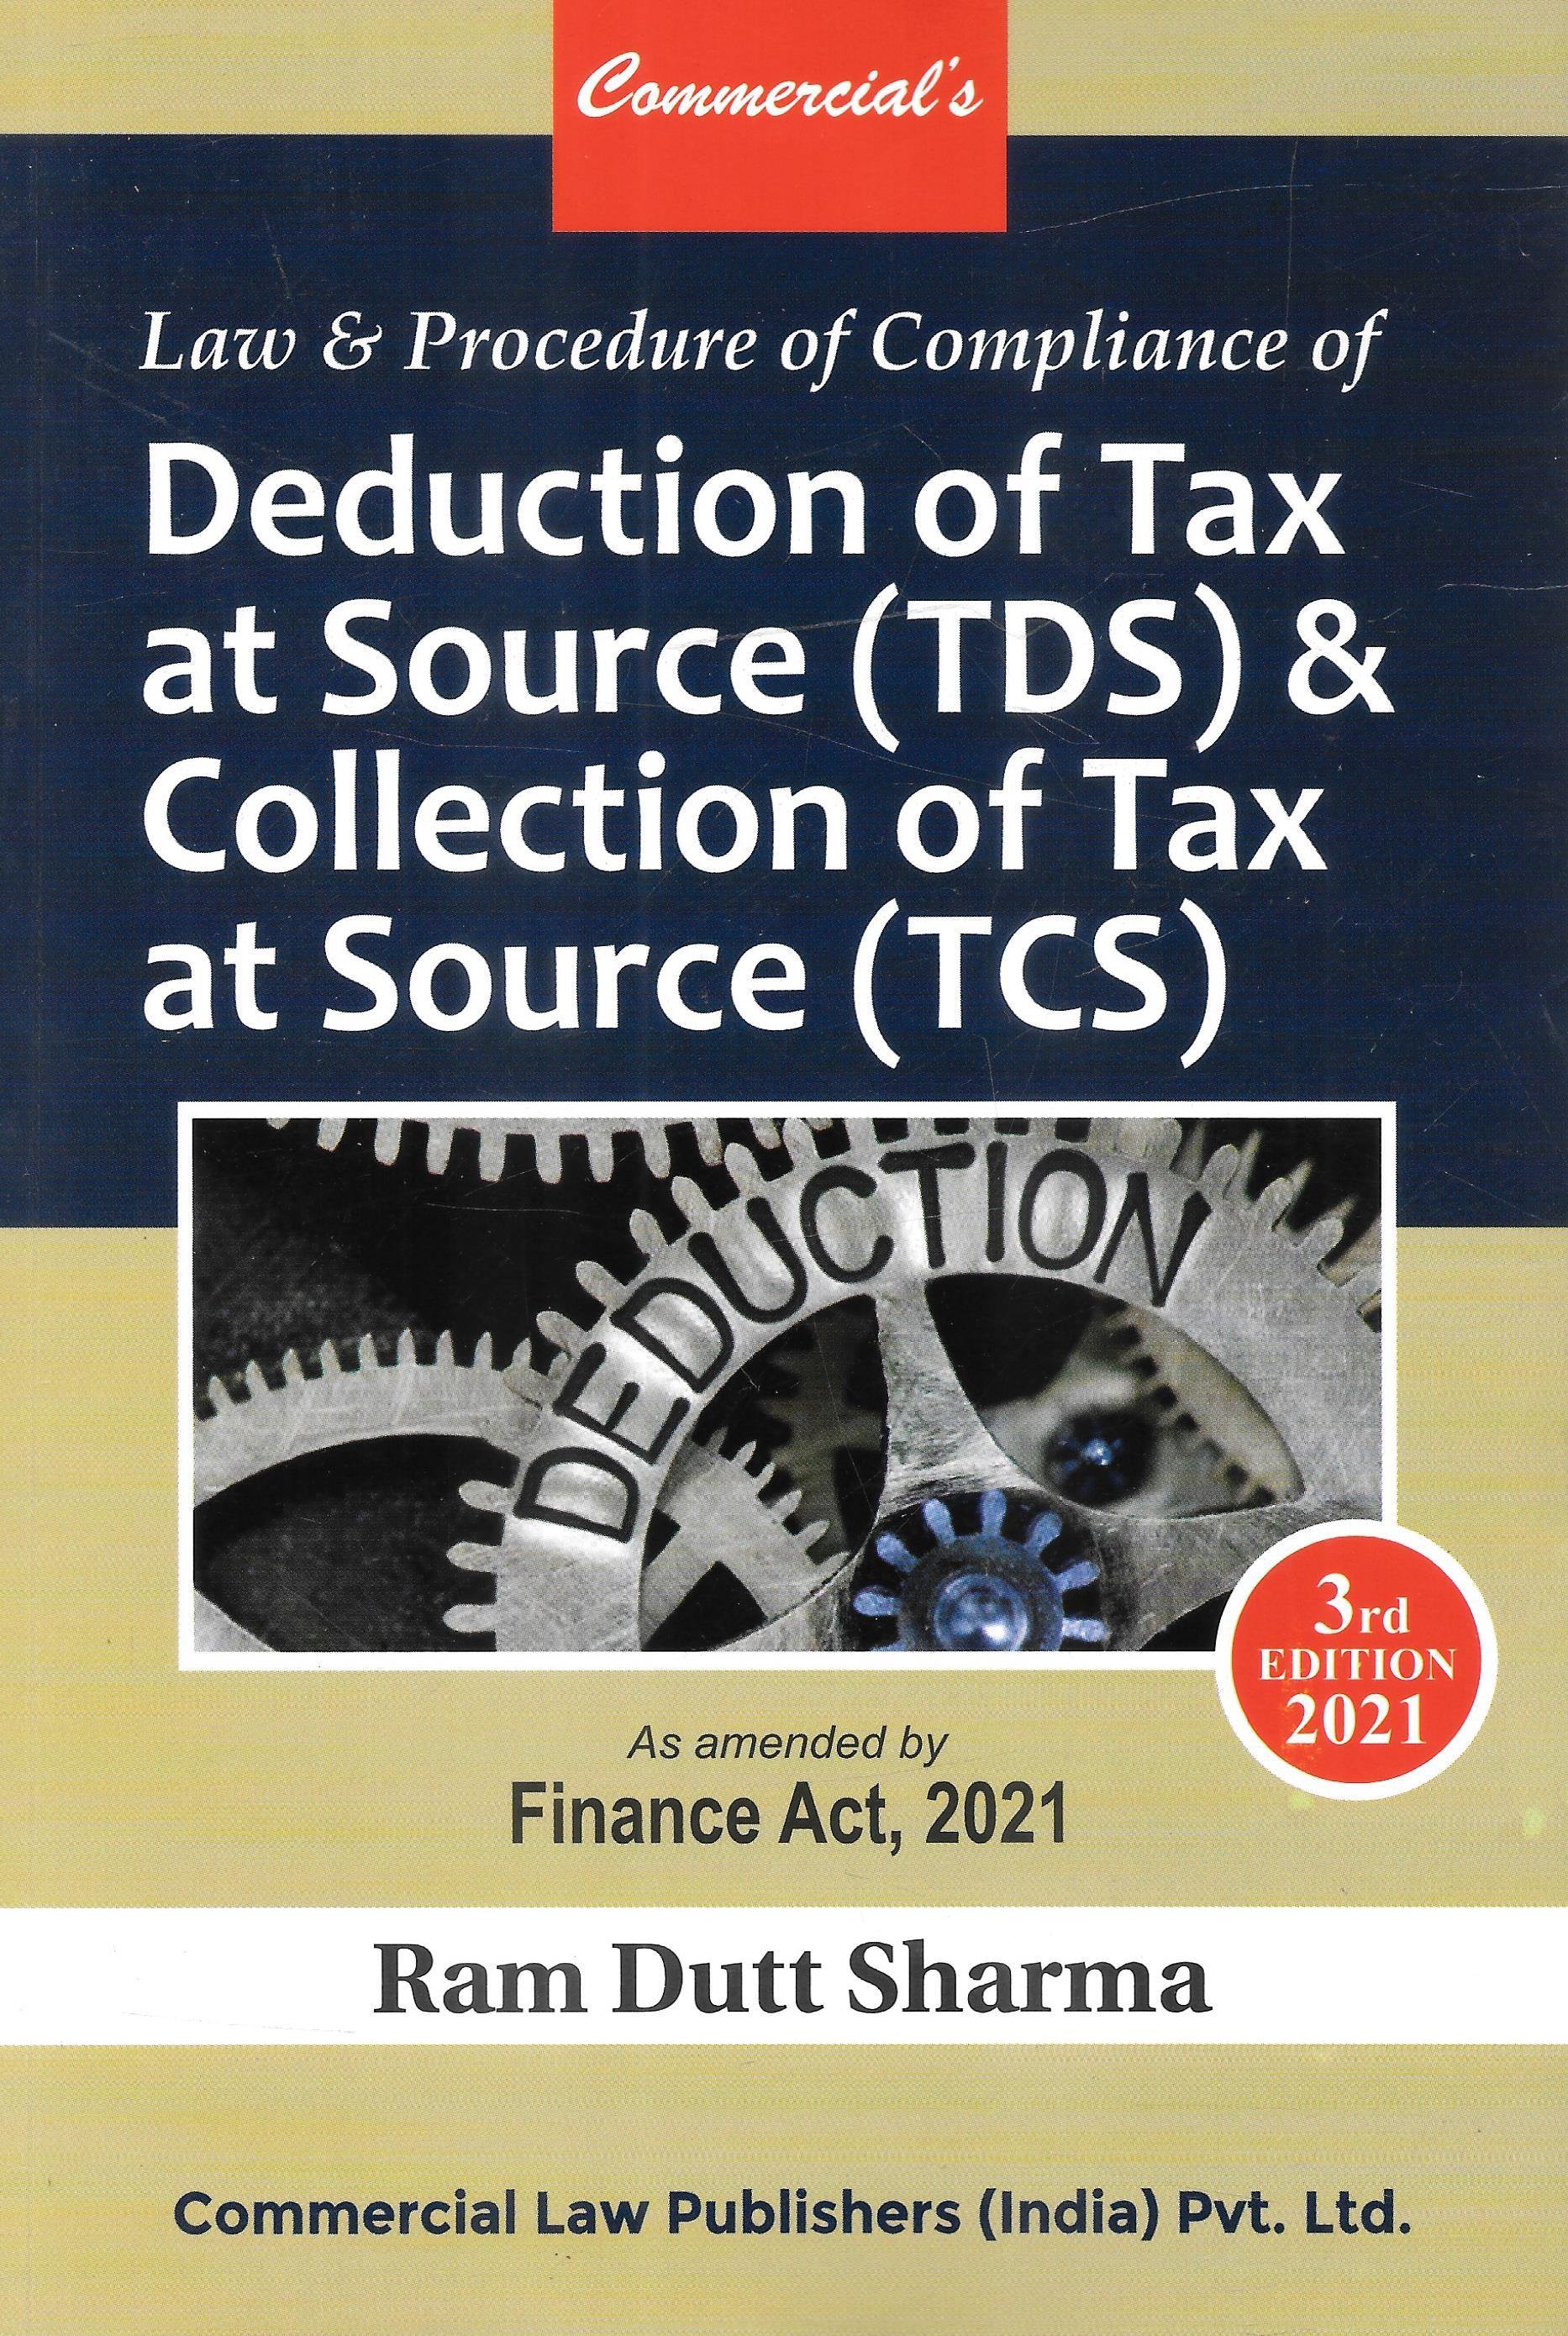 Law & Procedure Of Compliance Of Deduction Of Tax At Source (TDS) & Collection Of Tax At Source (TCS) - M&J Services